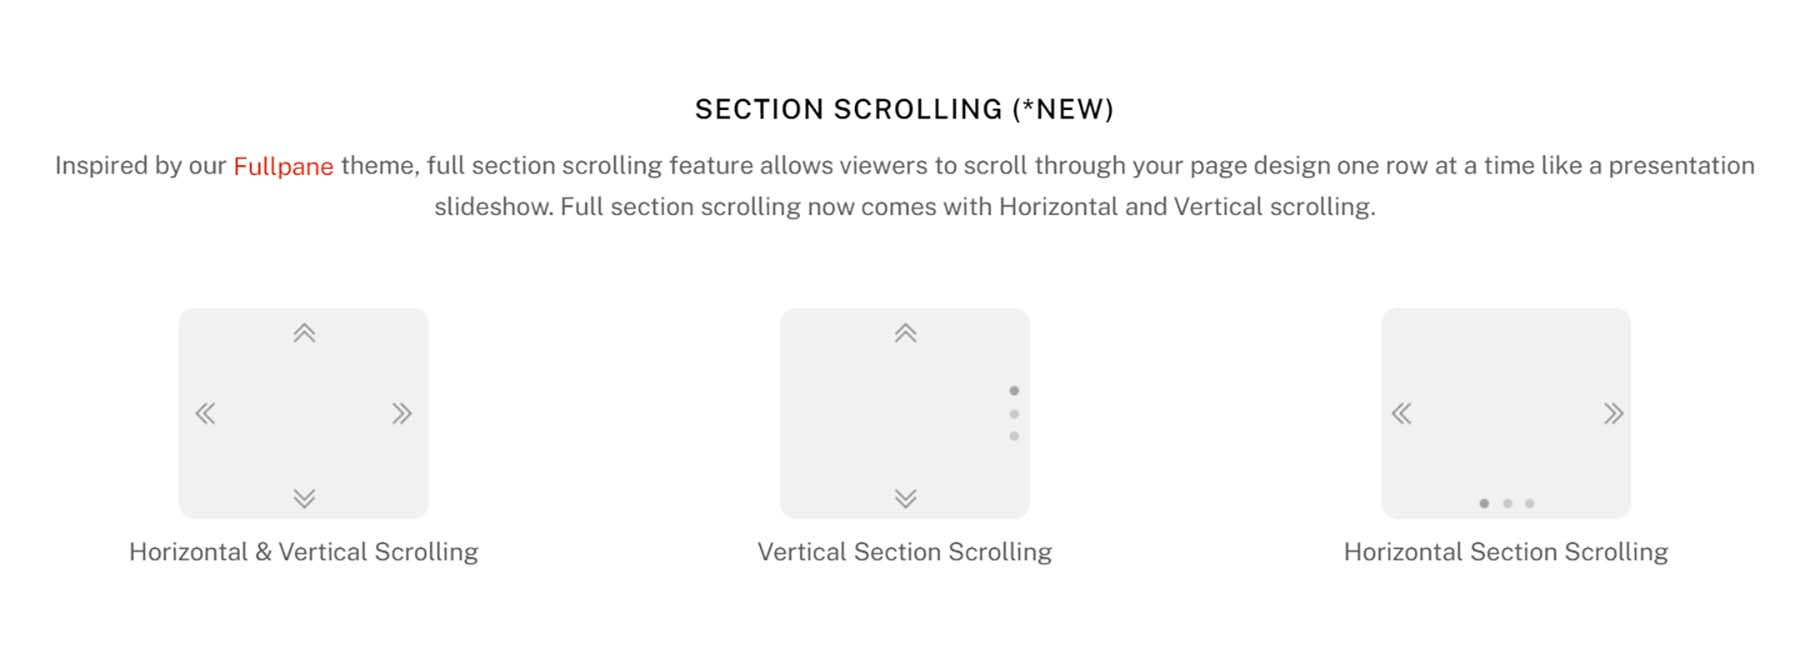 Section scrolling with Ultra